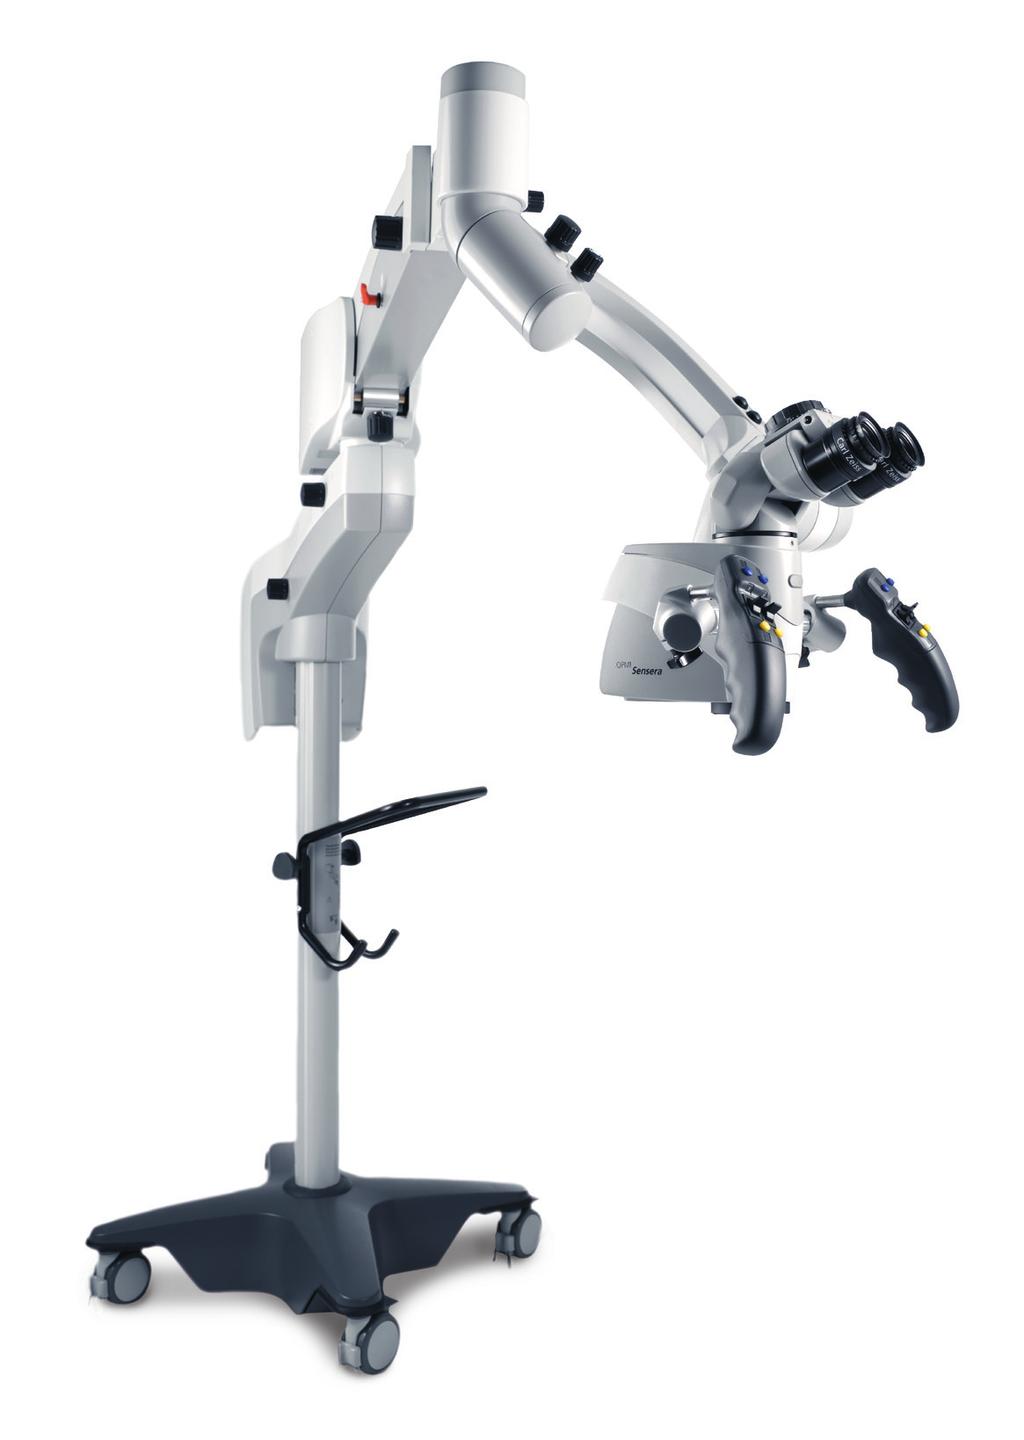 Ease of use Since ZEISS introduced the first surgical microscope in 1953, the field of otorhinolaryngology has been at the forefront of microsurgery.